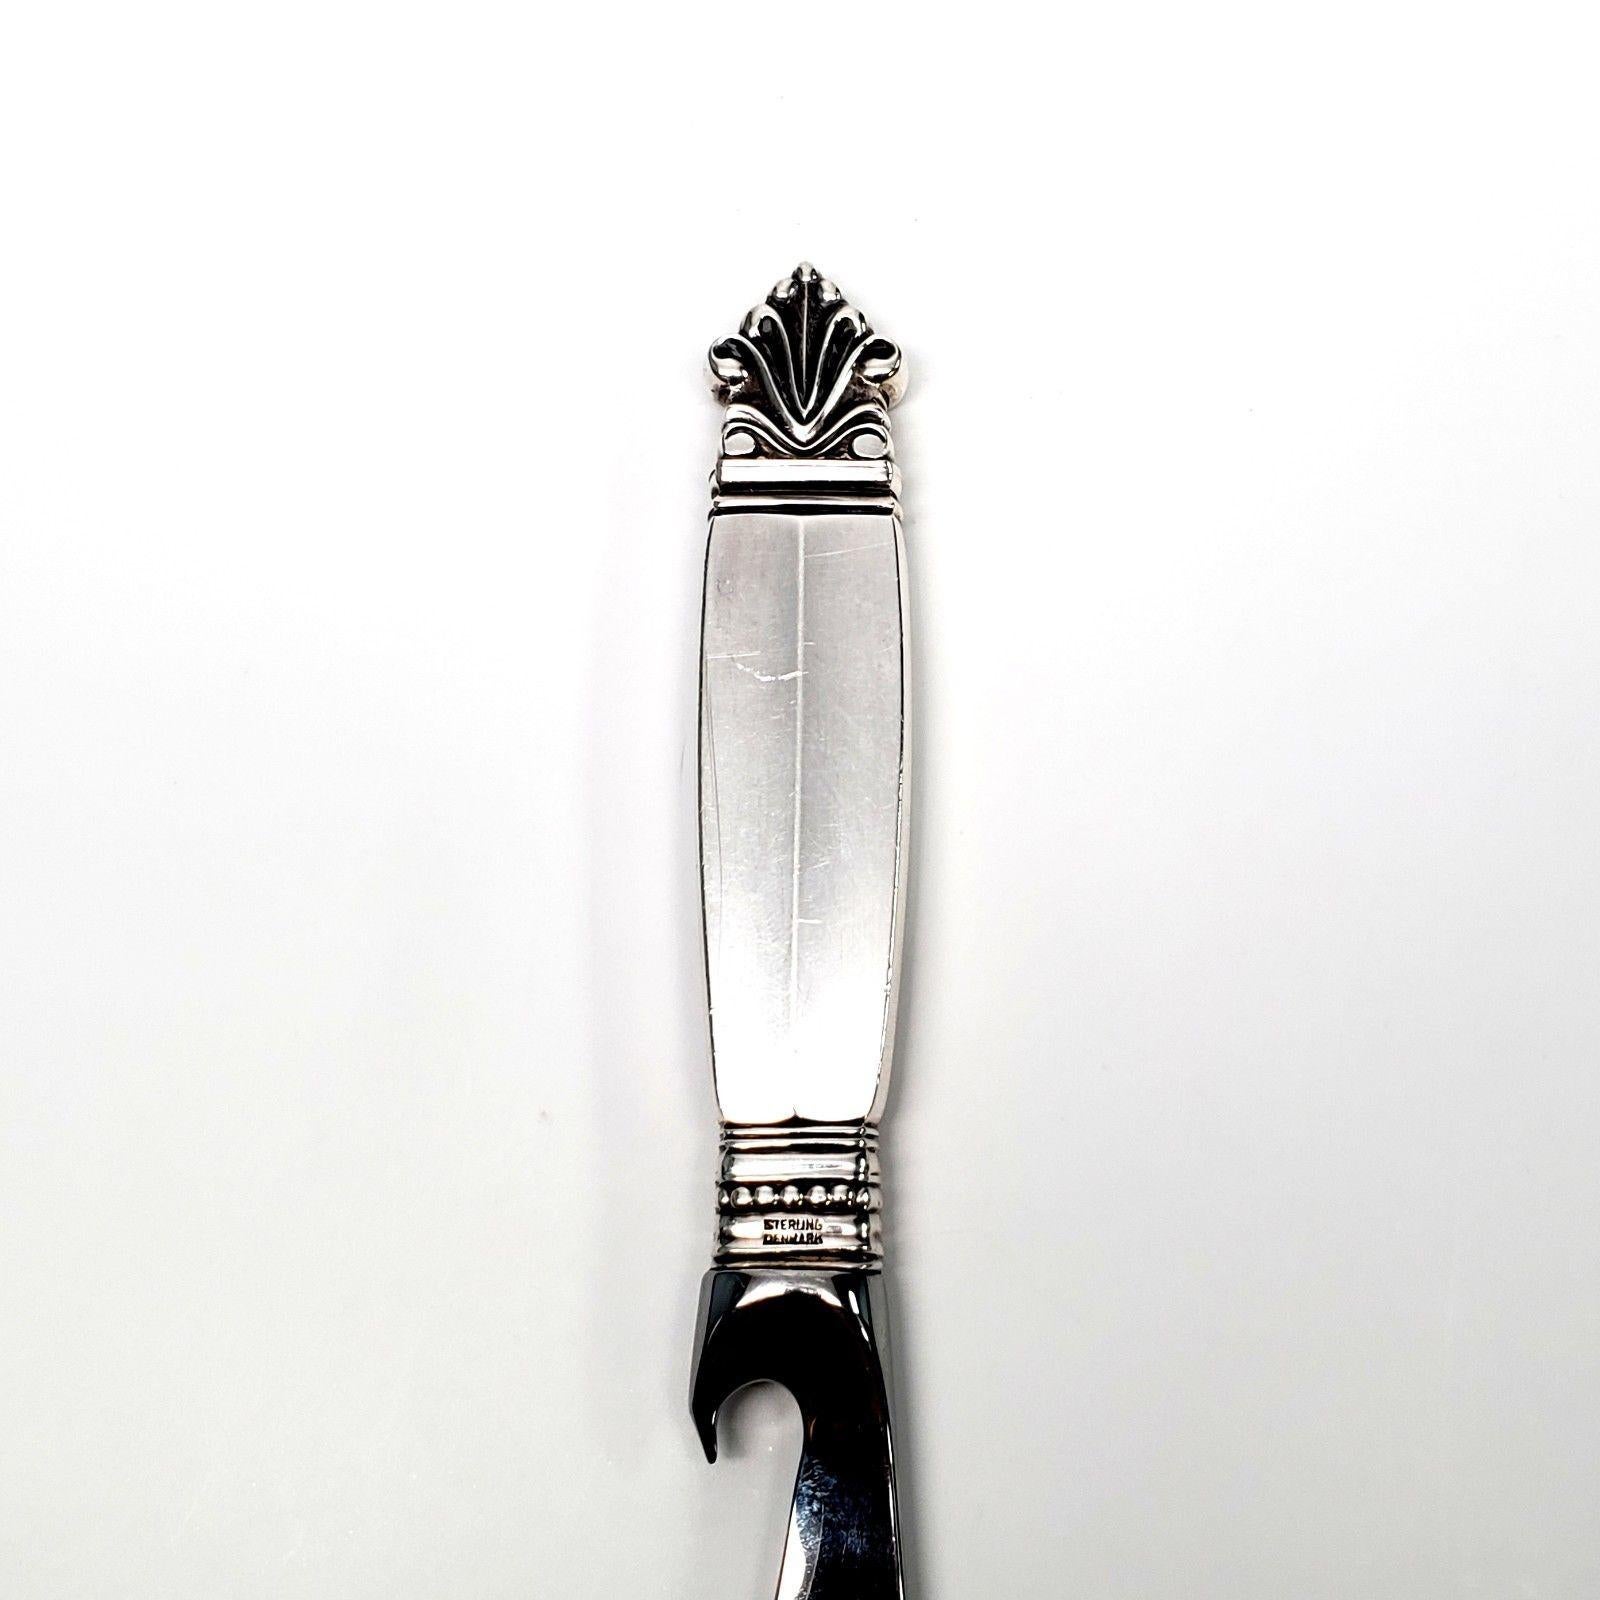 Georg Jensen sterling silver handled bar knife with stainless blade in the Acanthus pattern. Marked: STERLING DENMARK GEORG JENSEN on handle, STAINLESS on blade. Measures 8 1/4